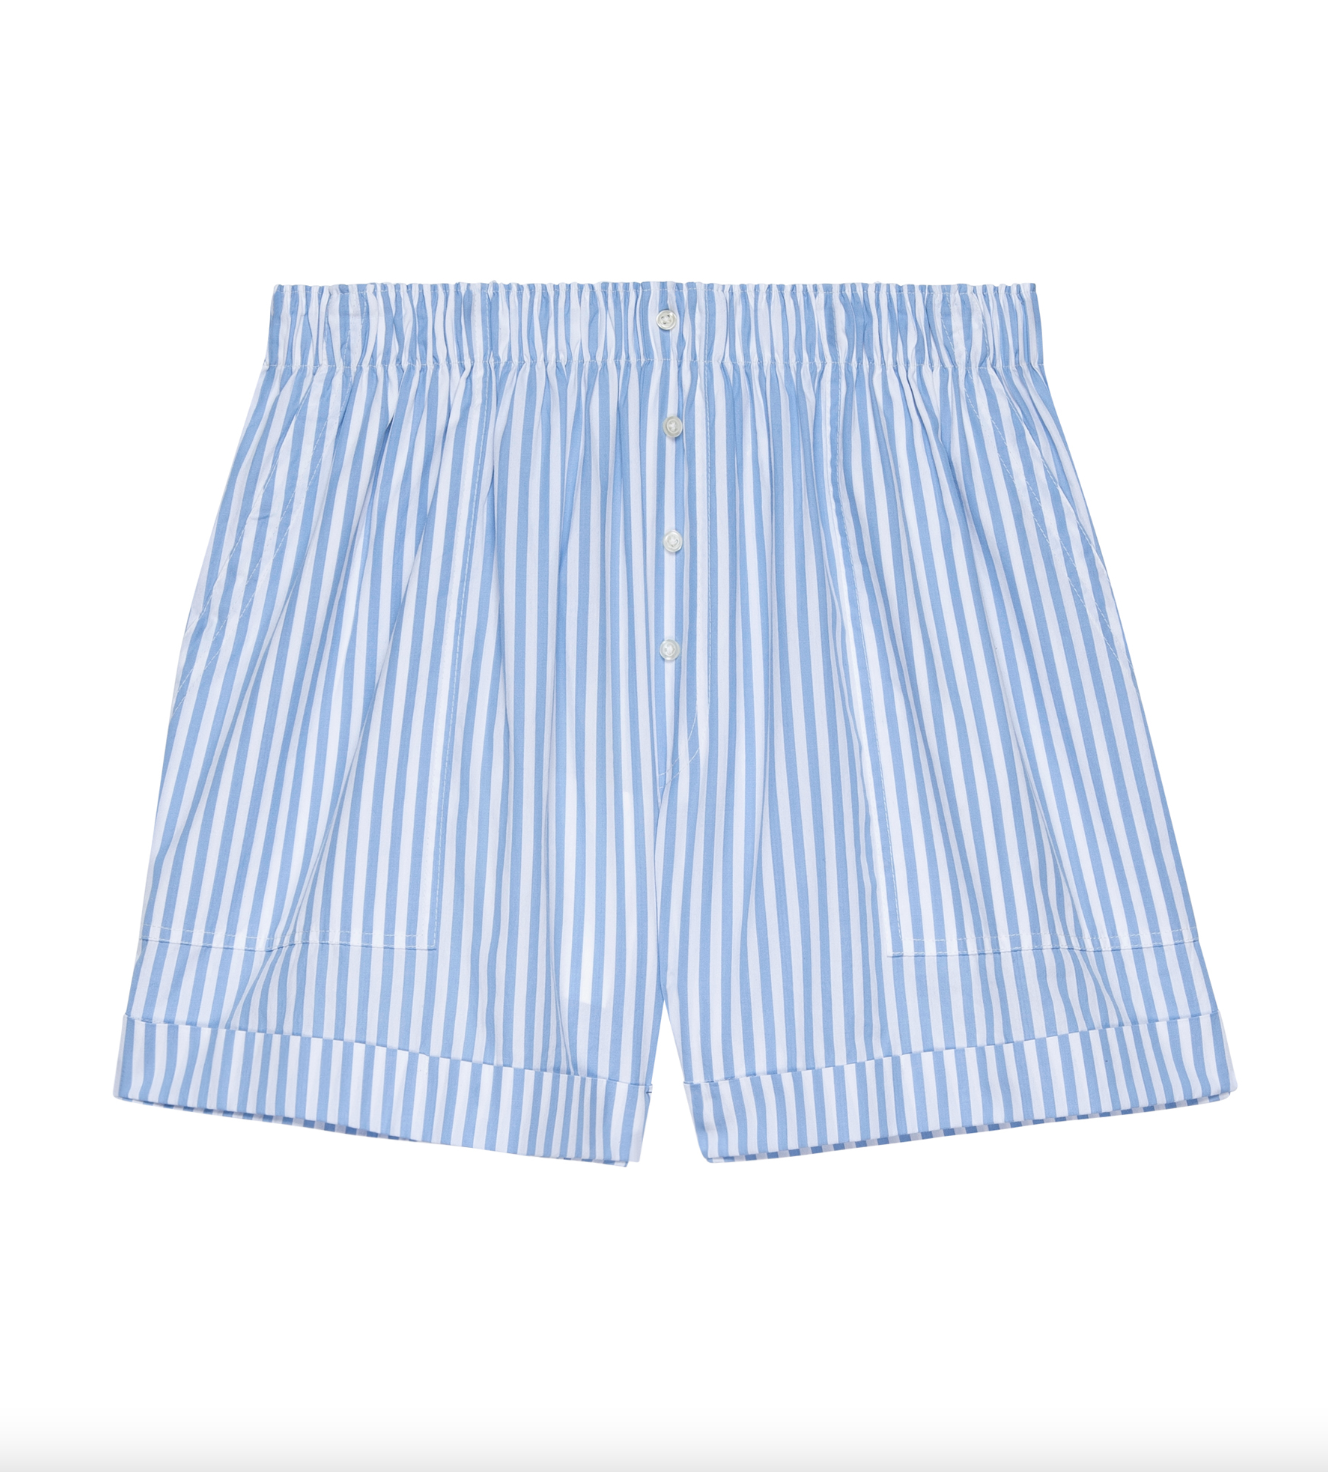 A pair of The Great Inc. men&#39;s Boxer Short LIGHT SKY STUDIO STRIPE with blue and white vertical stripes, featuring a buttoned fly, displayed on a white background in Scottsdale Arizona.